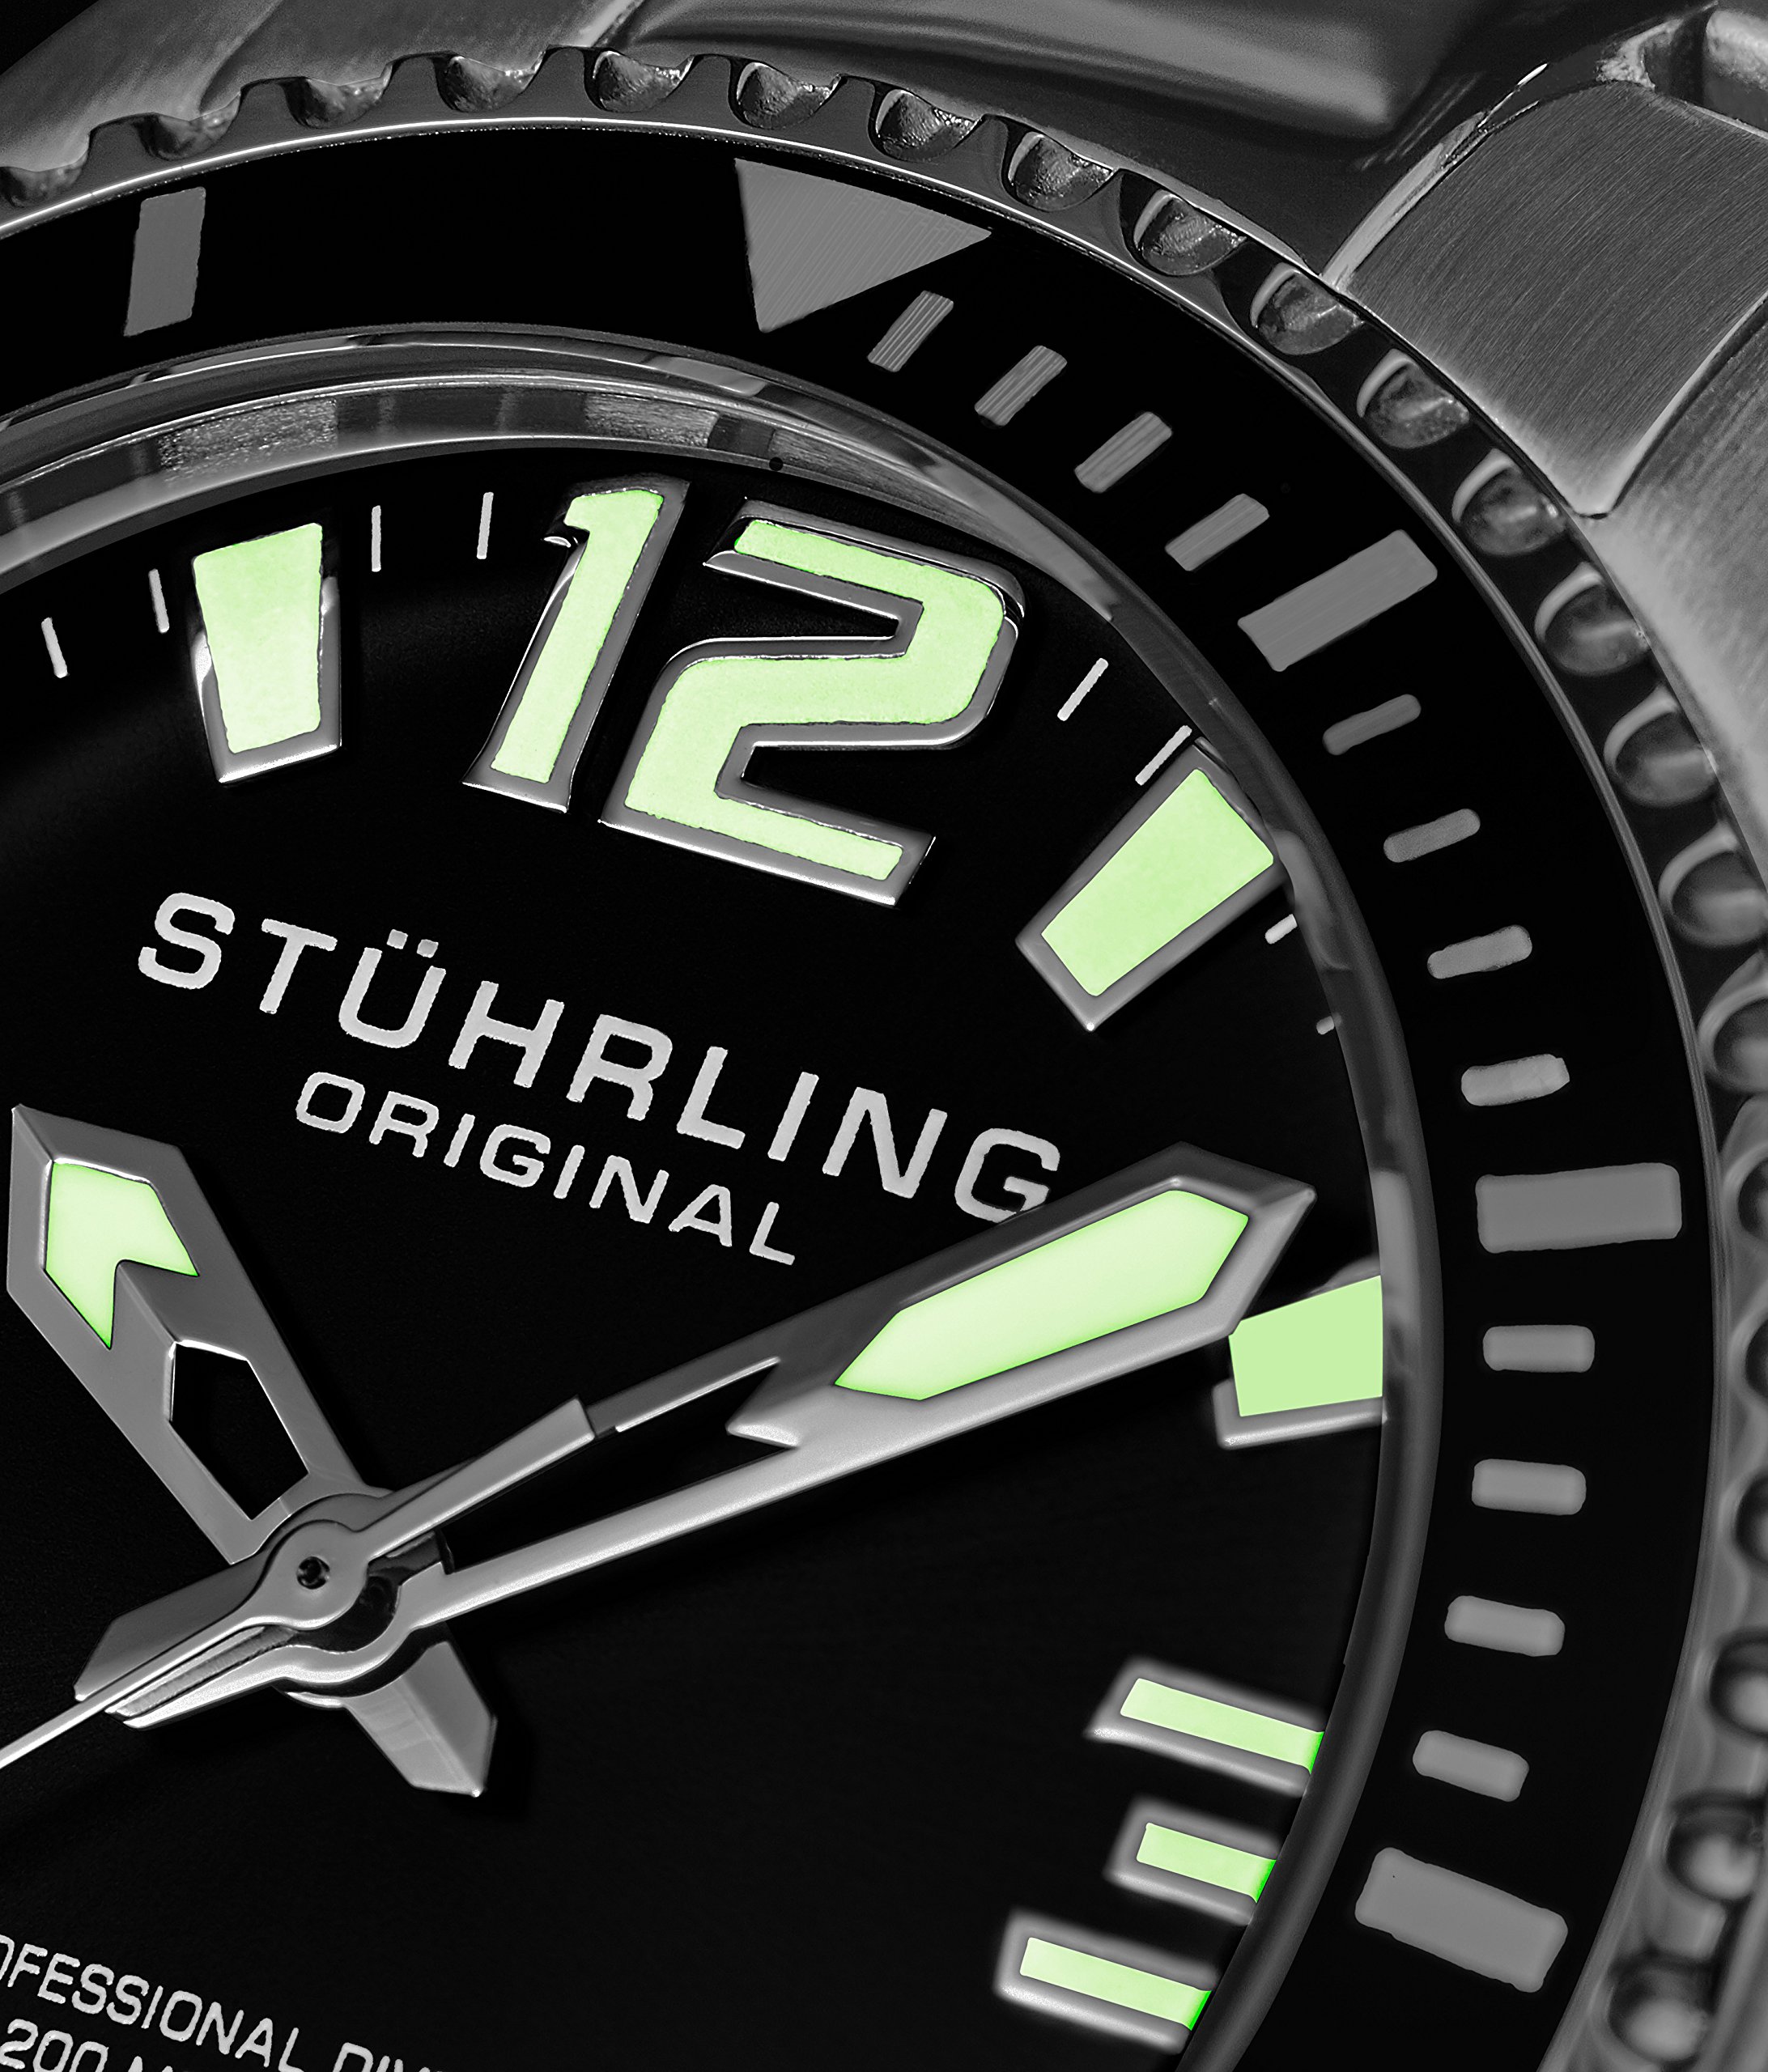 Stuhrling Original Mens Analog Dive Watch - Sports Watch Water Resistant 100 Meters - Watches for Men Aqua-Diver Stainless Steel Link Bracelet Mens Watches Collection (Black)